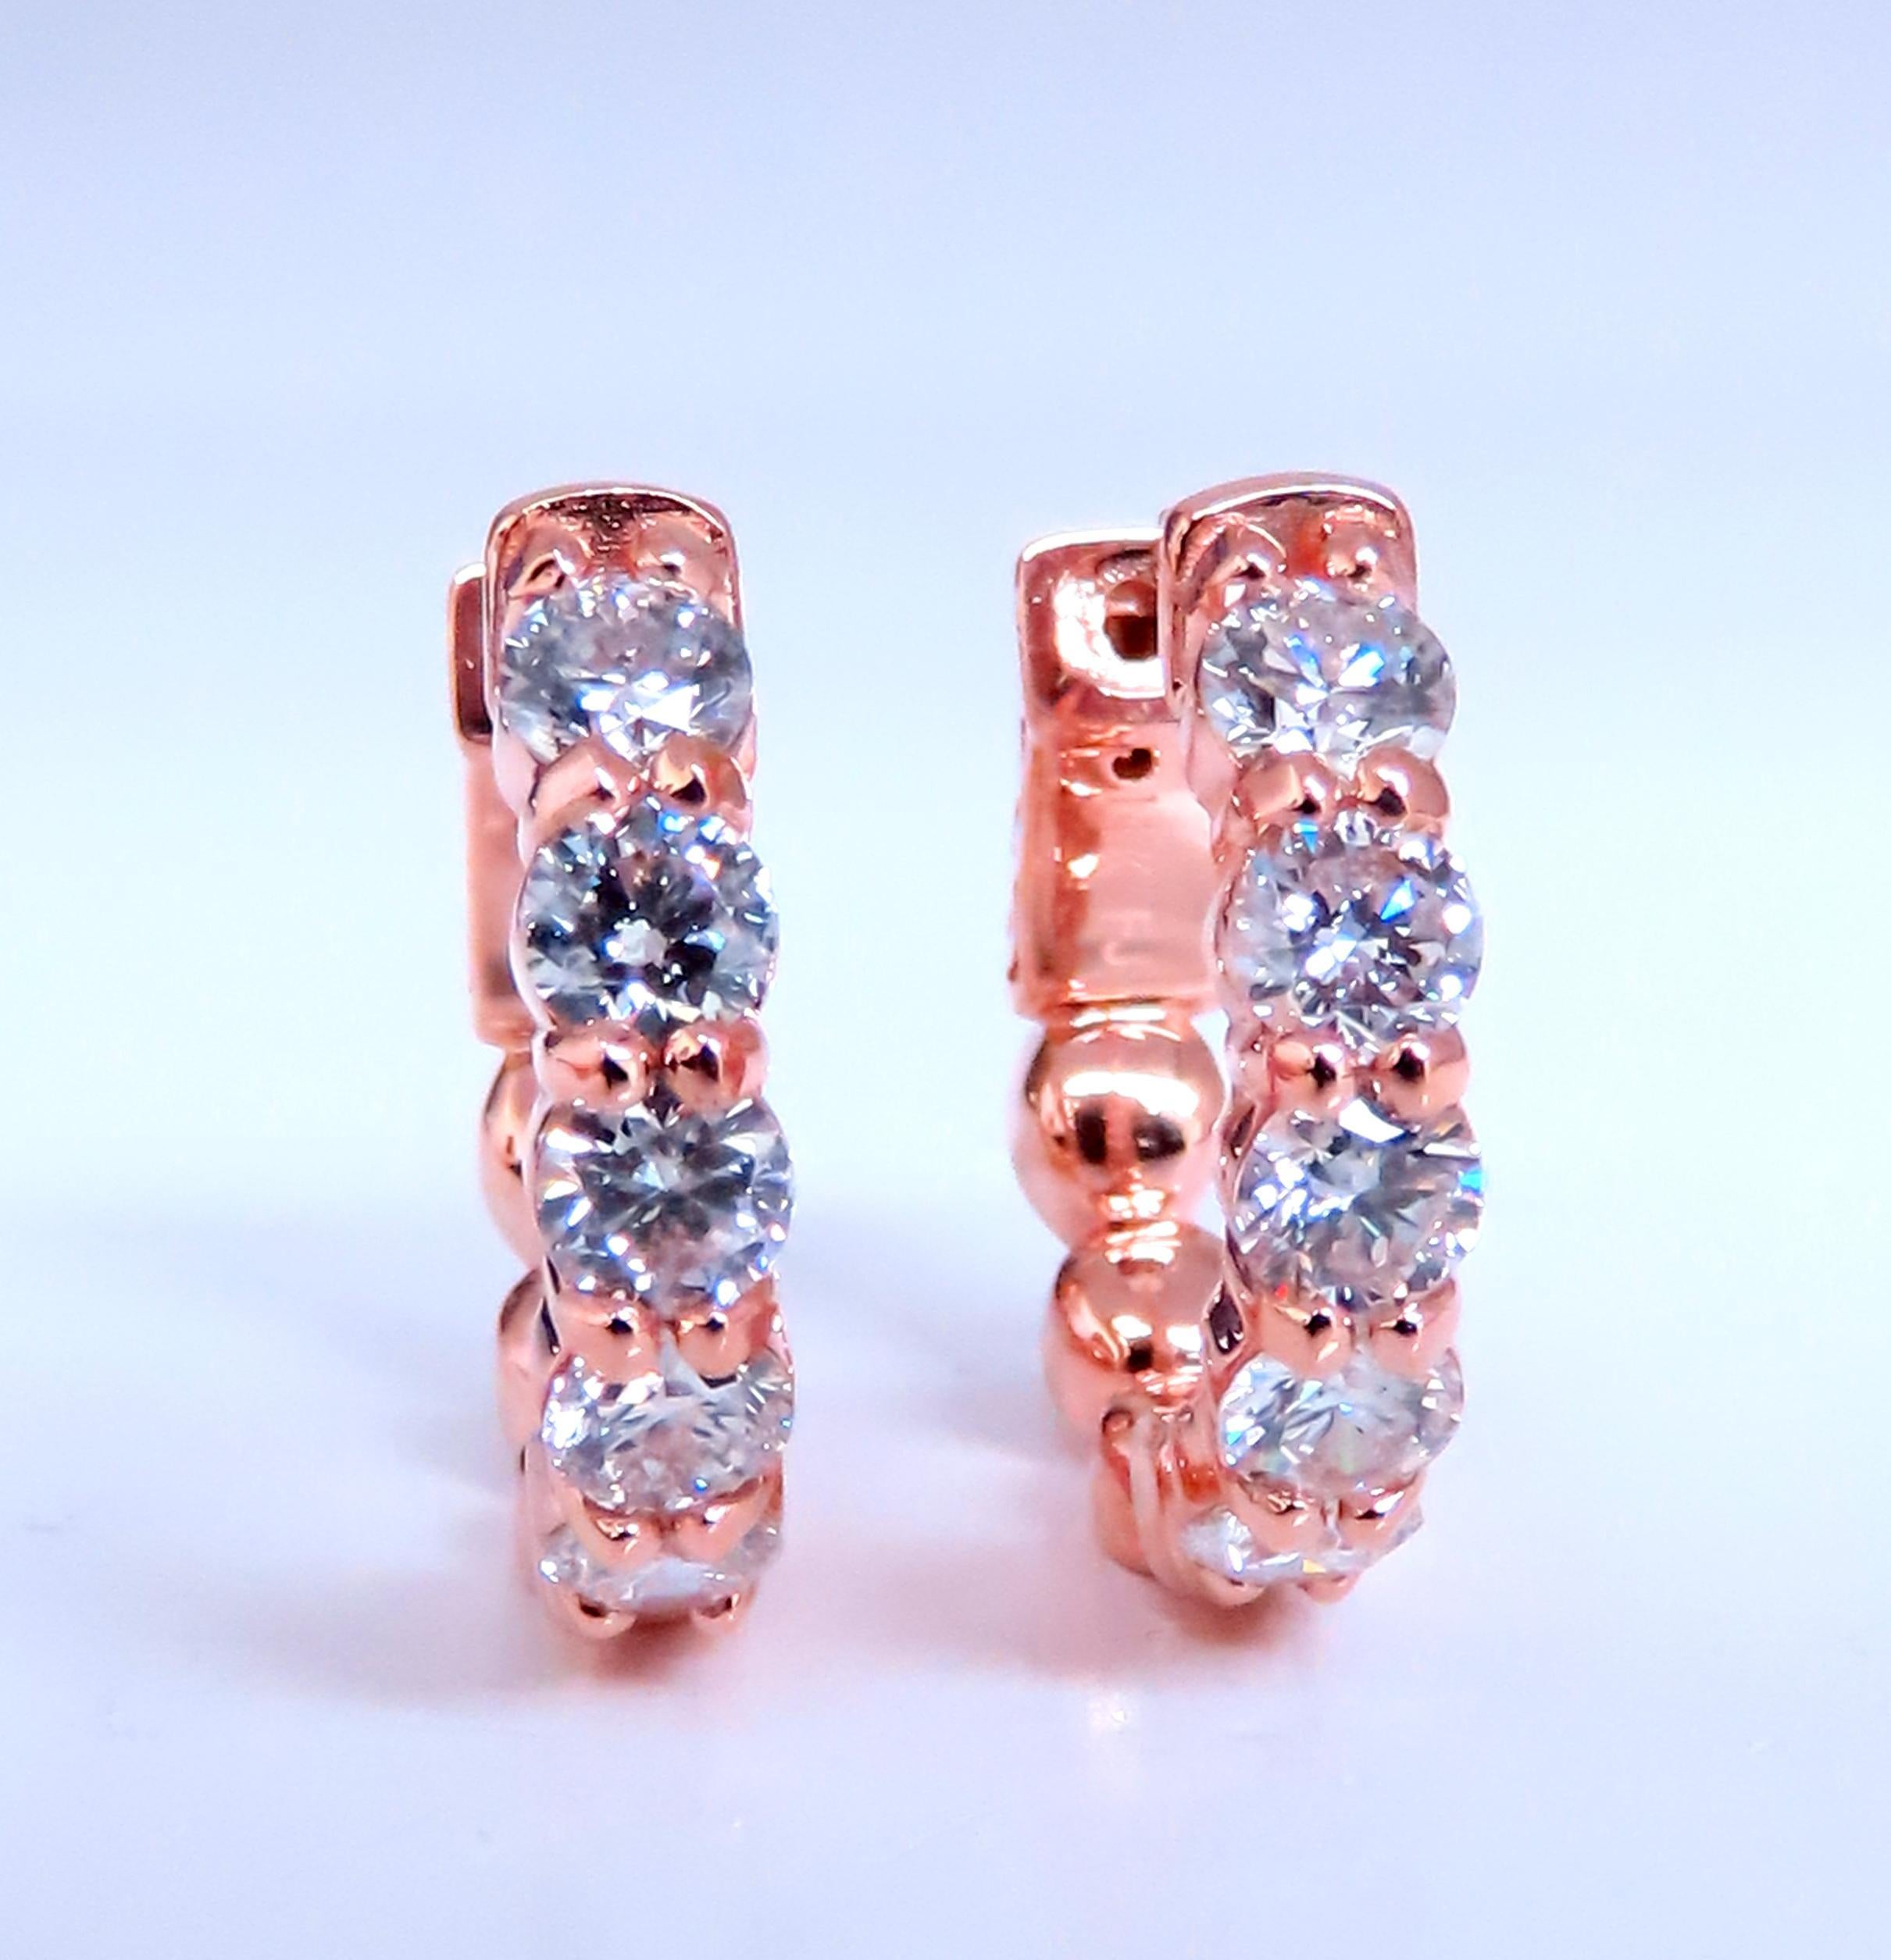 1.98ct Natural Round diamond hoop earrings.
Modern and functional button release closure.
G-color Vs-2 clarity.
14kt. rose gold.
7 grams
18.5mm wide
3.5mm diamond row 
Diamonds are within sharing prongs to serve max brilliance.

$6000 appraisal